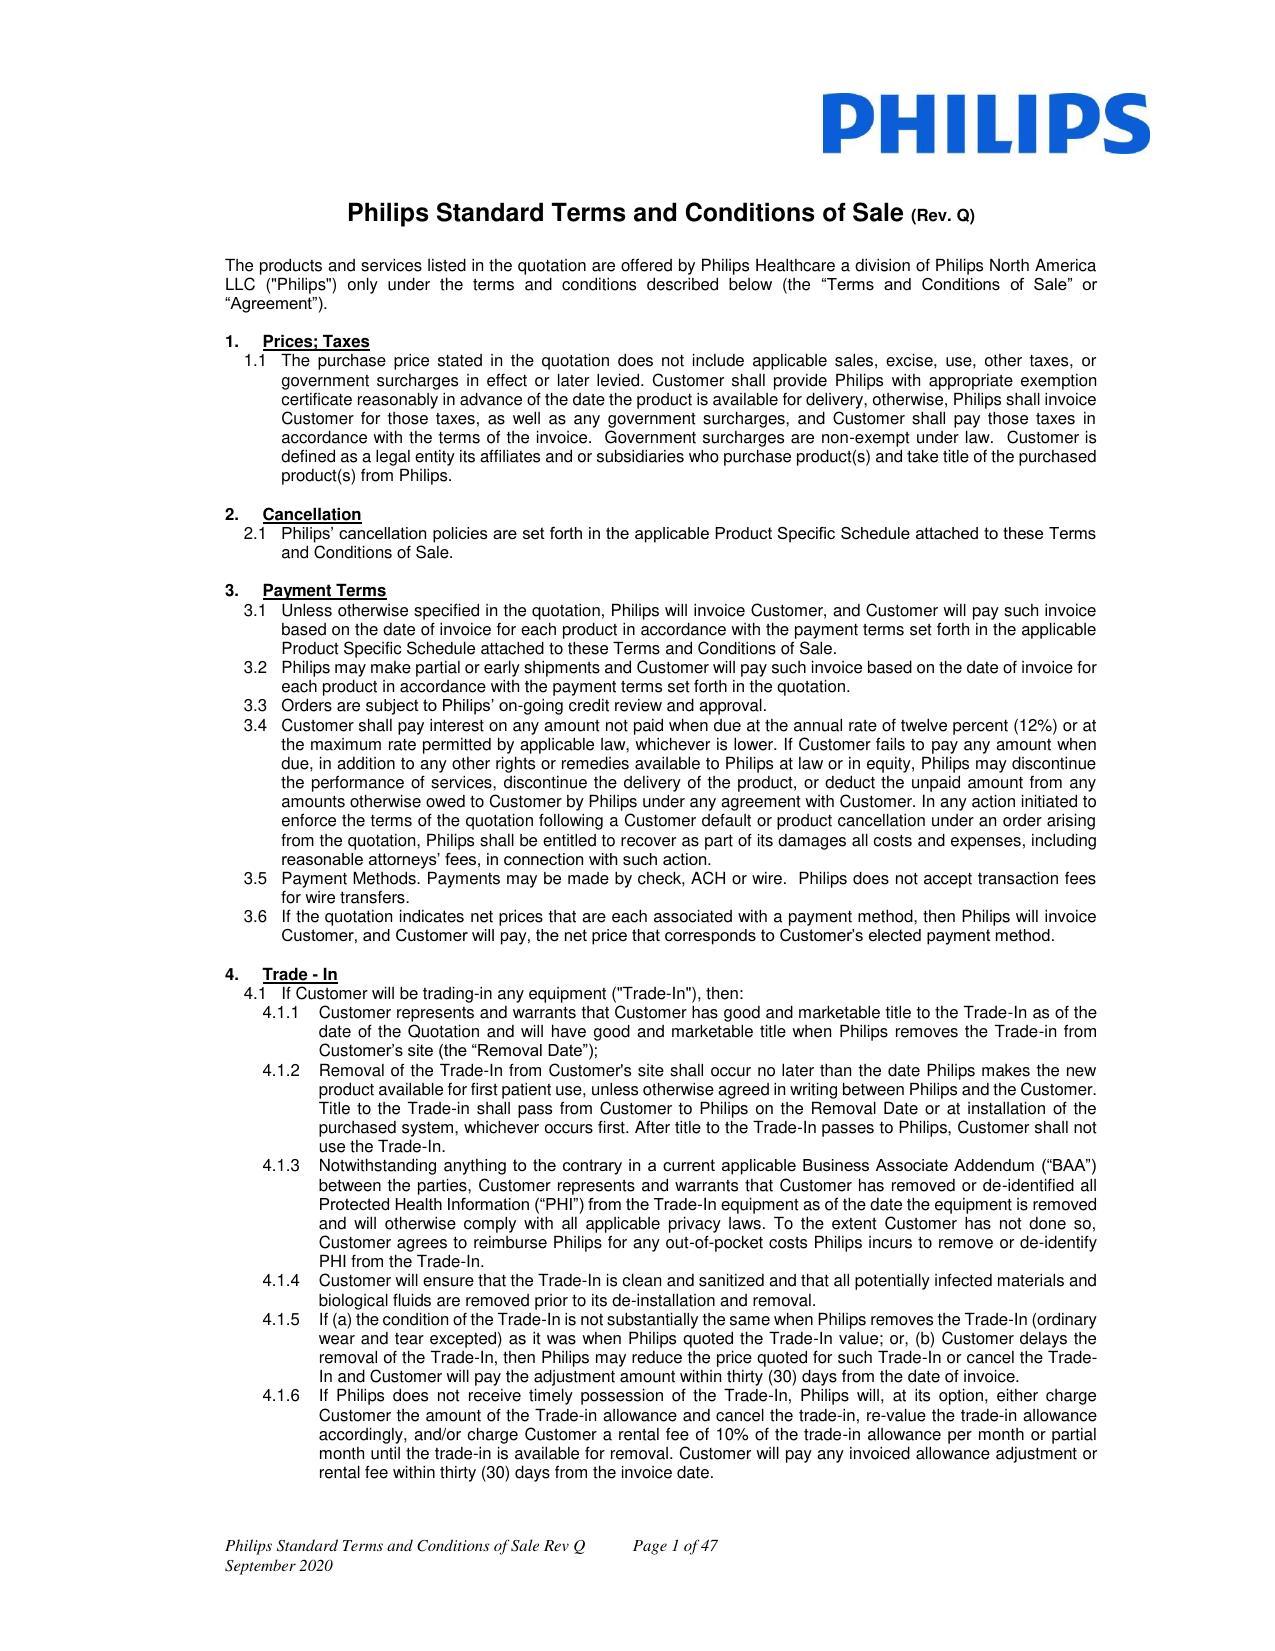 philips-standard-terms-and-conditions-of-sale-rev-q-september-2020.pdf